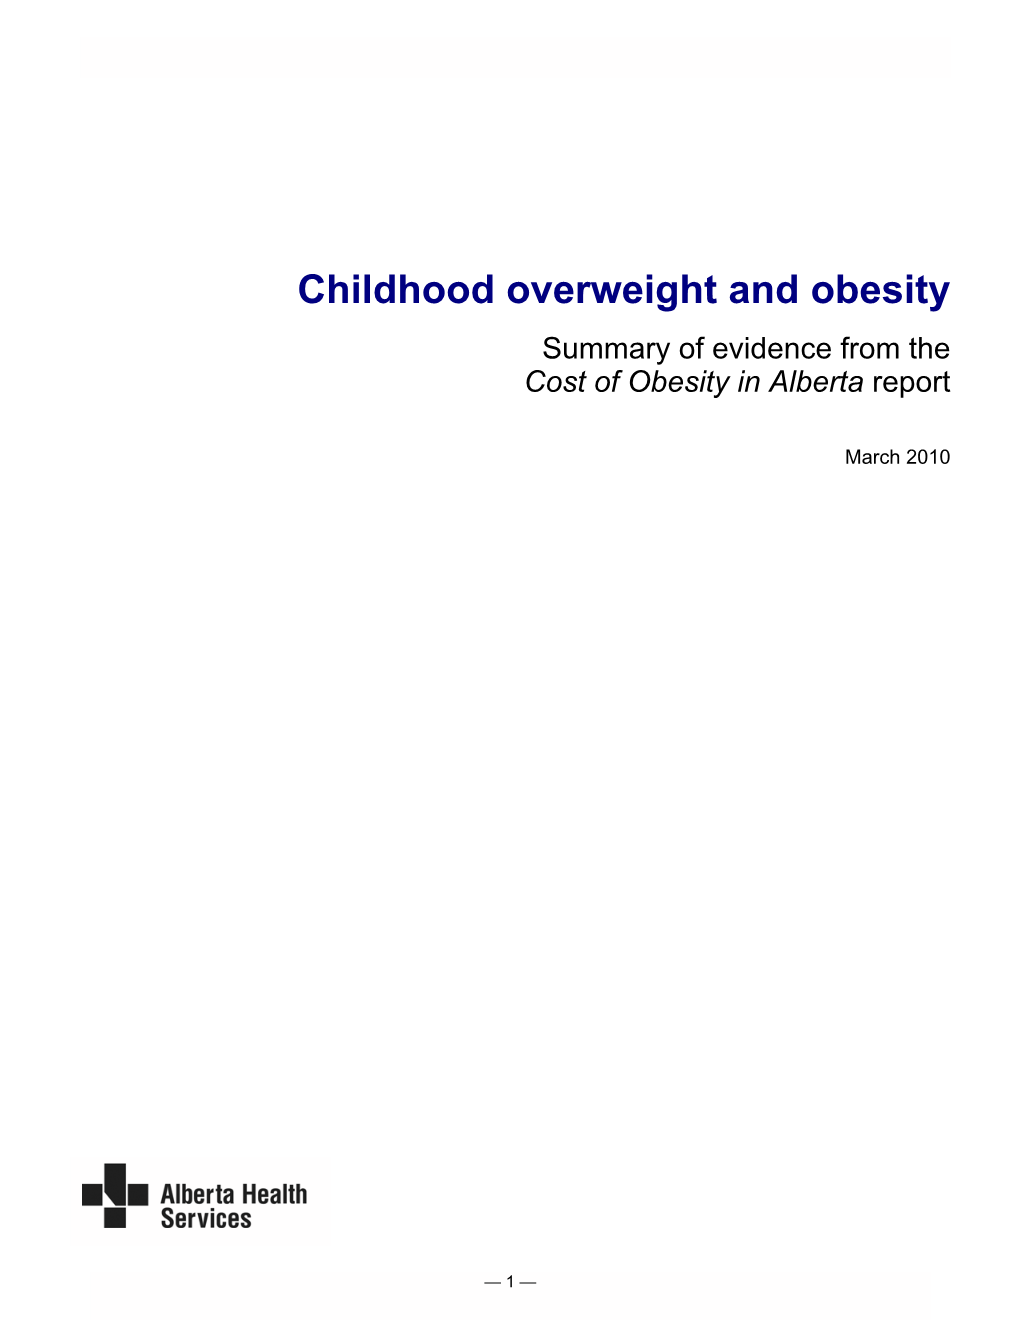 Childhood Overweight and Obesity: Evidence from the Cost of Obesity in Alberta for AHS | Population and Public Health 2005 Report